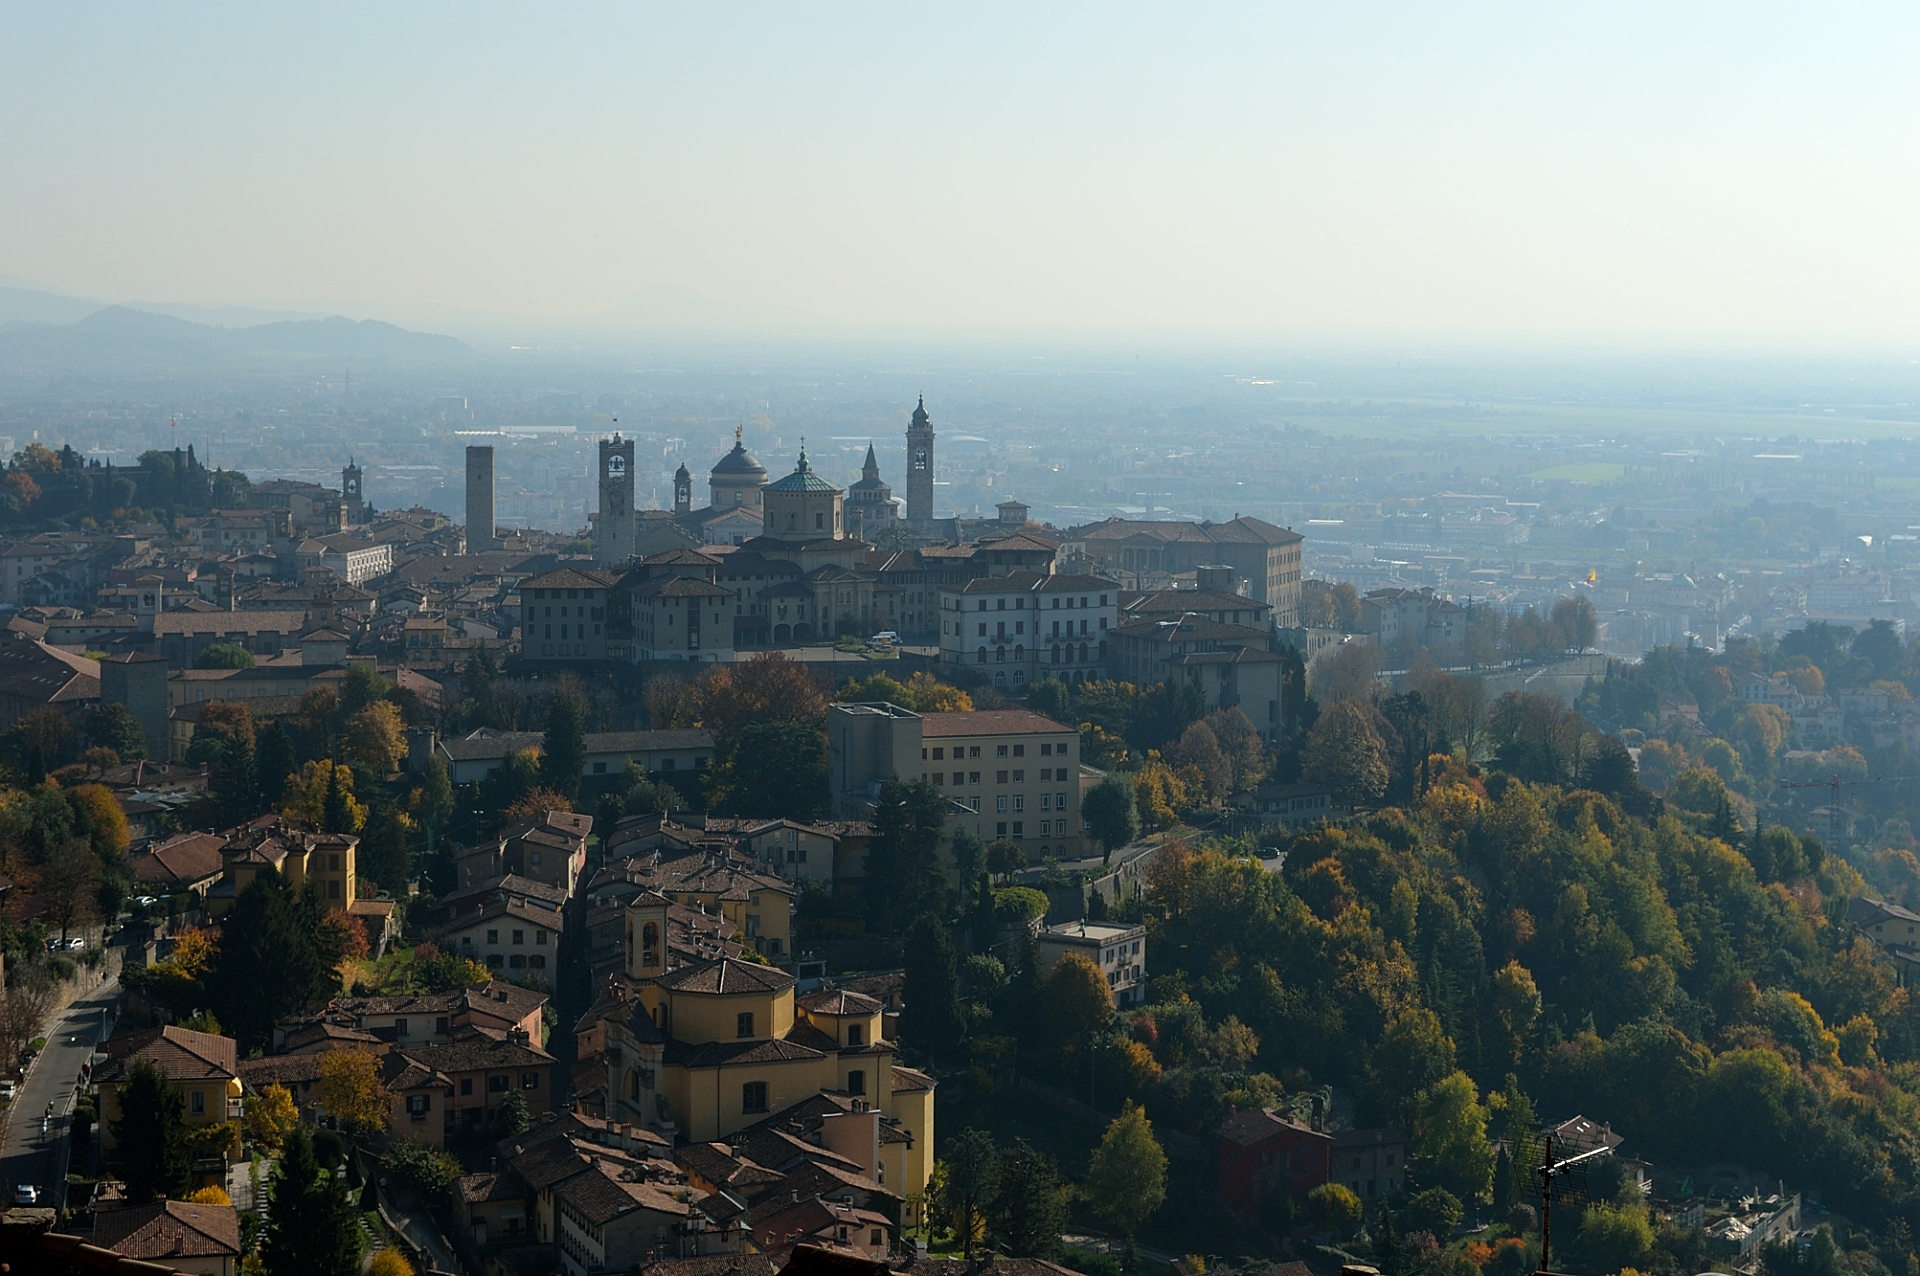 Weekend in Bergamo. A charming place full of history